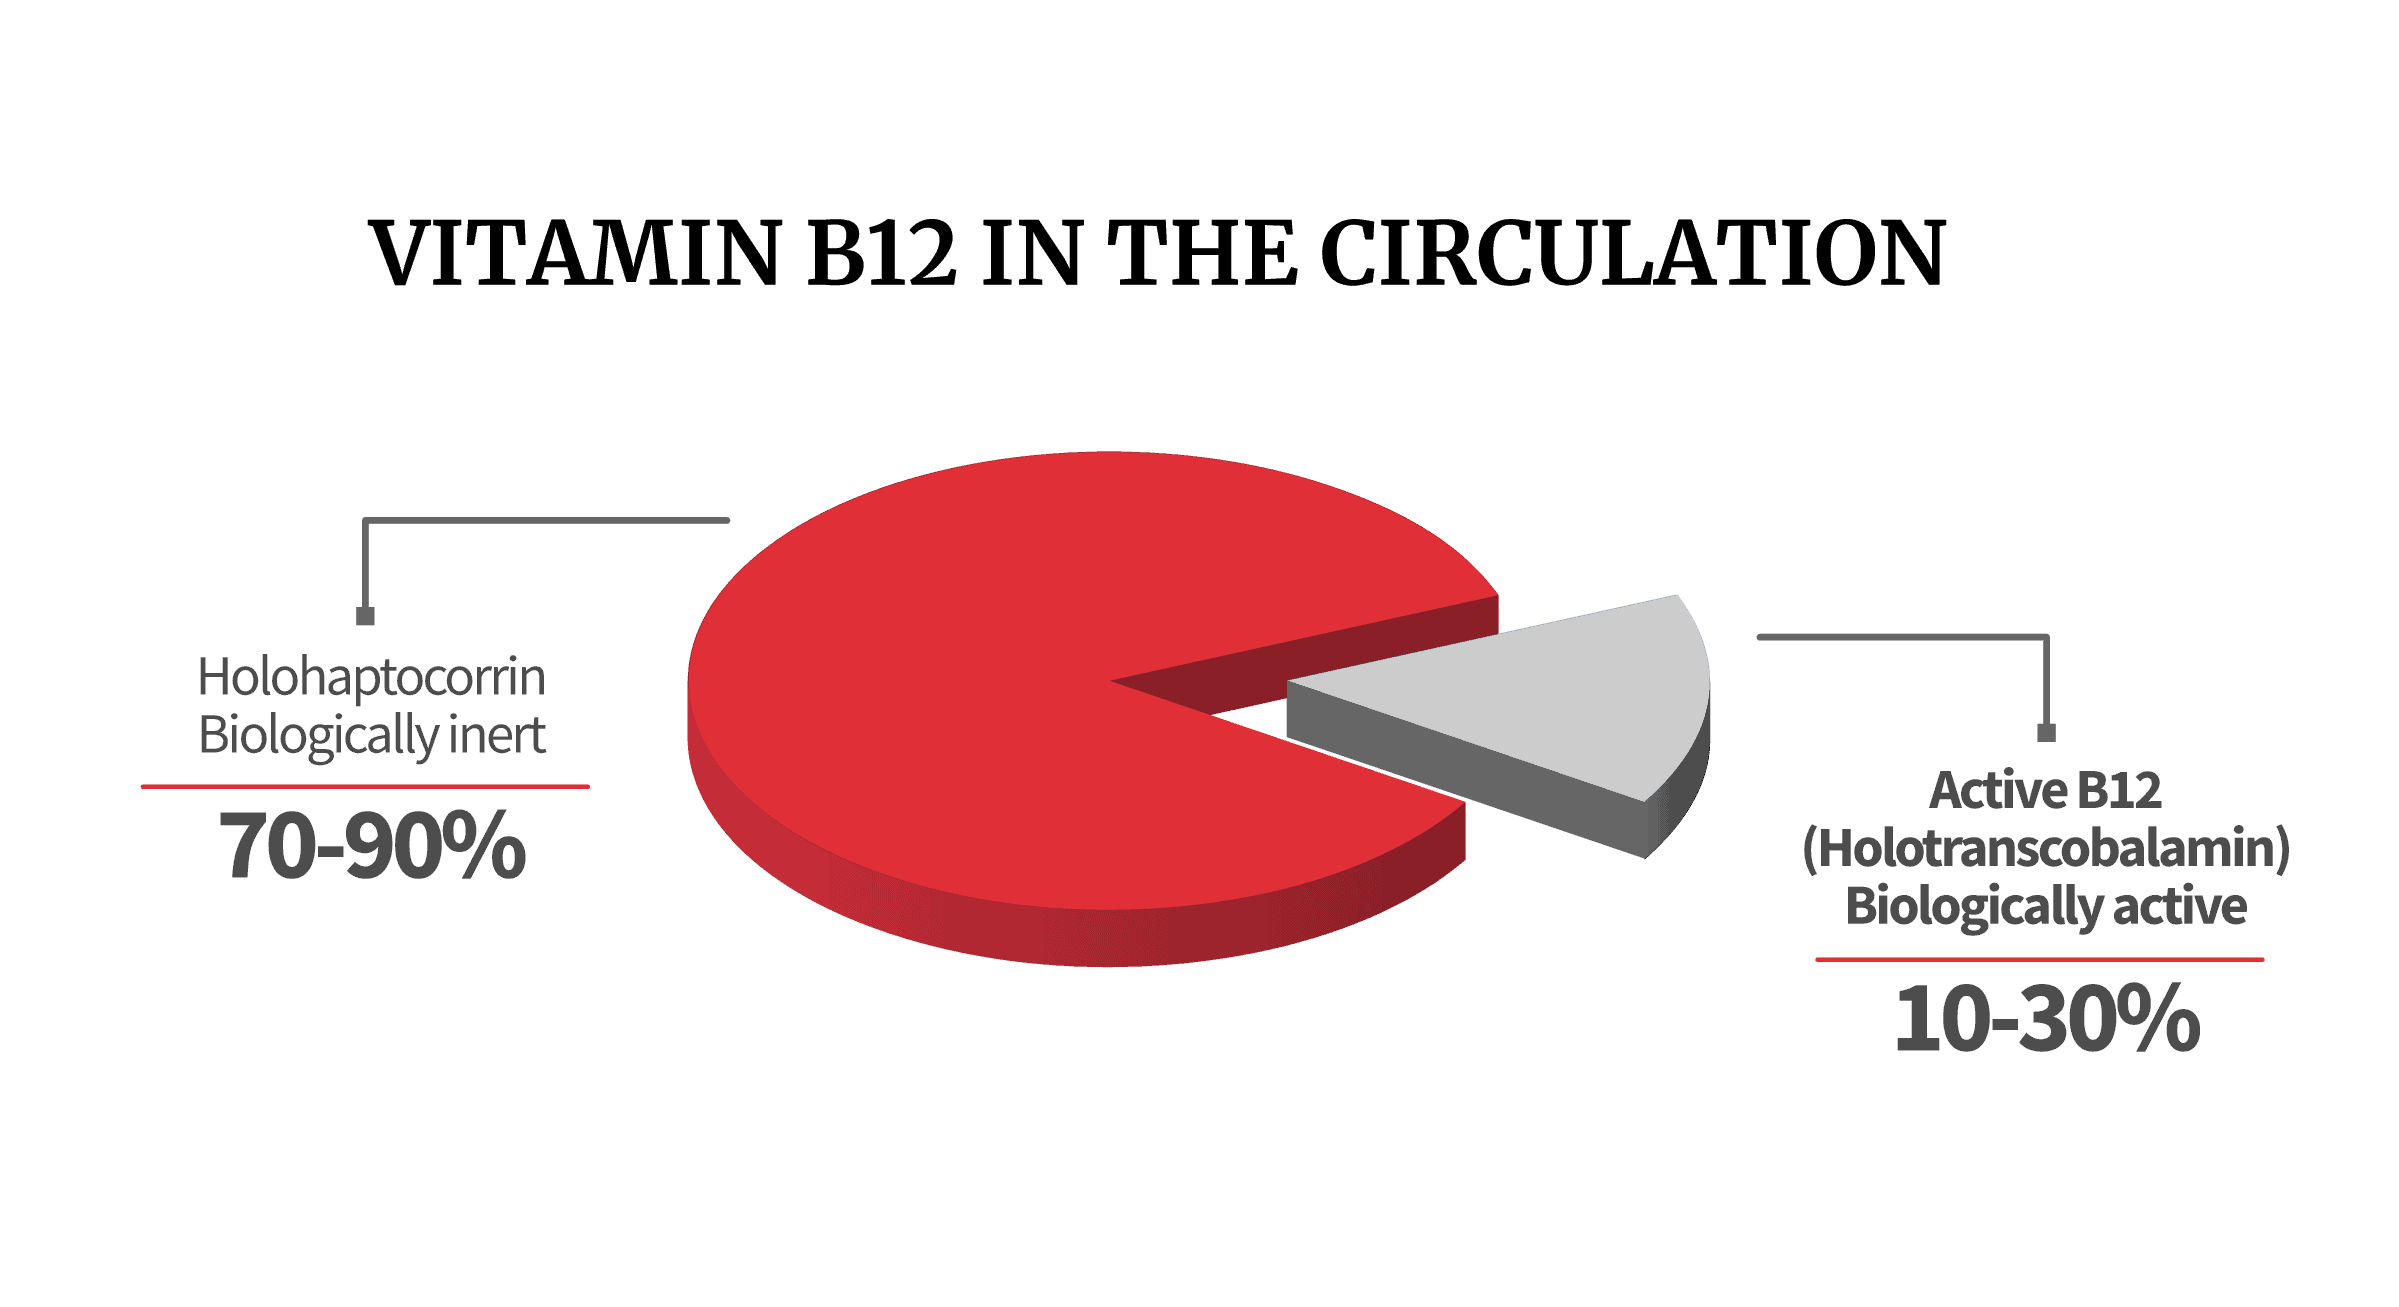 Total-B12 & active-B12 in the circulation